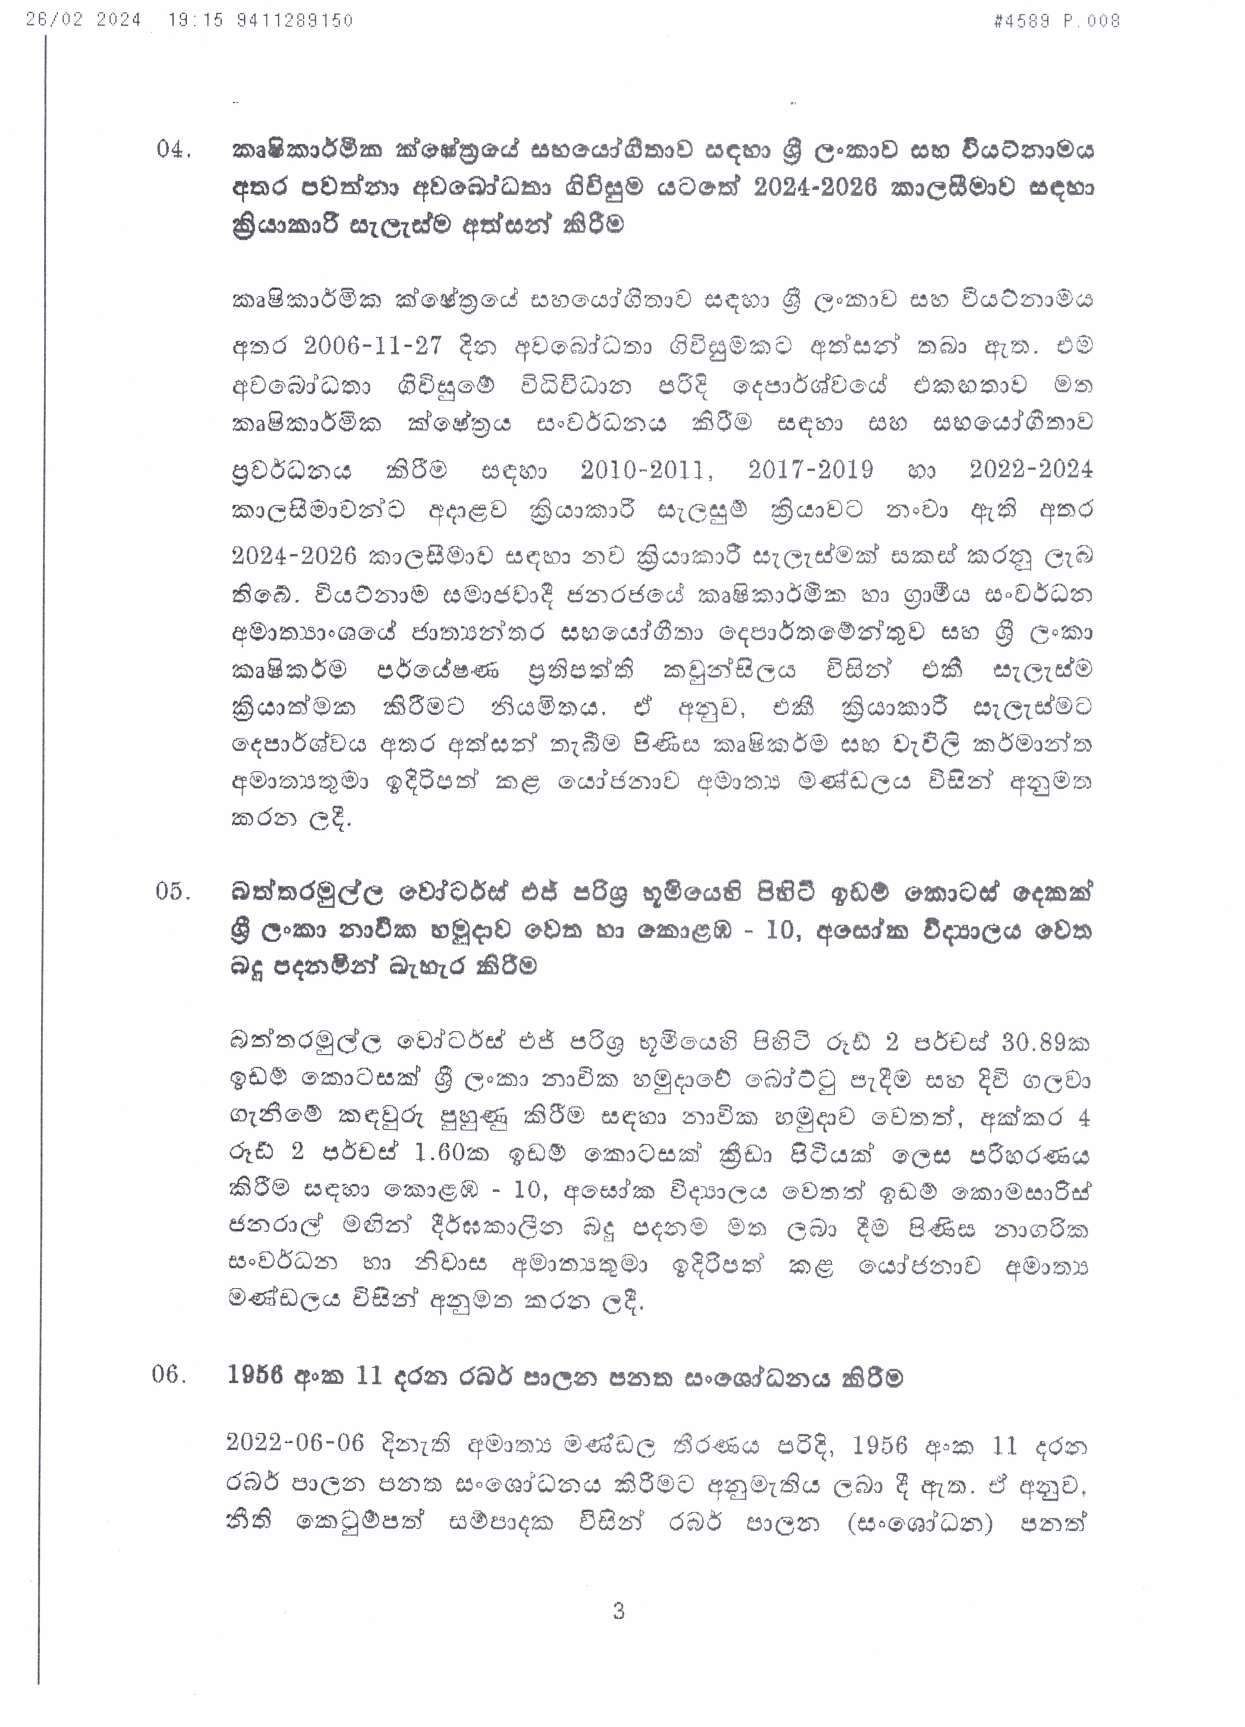 Cabinet Decision on 26.02.2024 page 00031